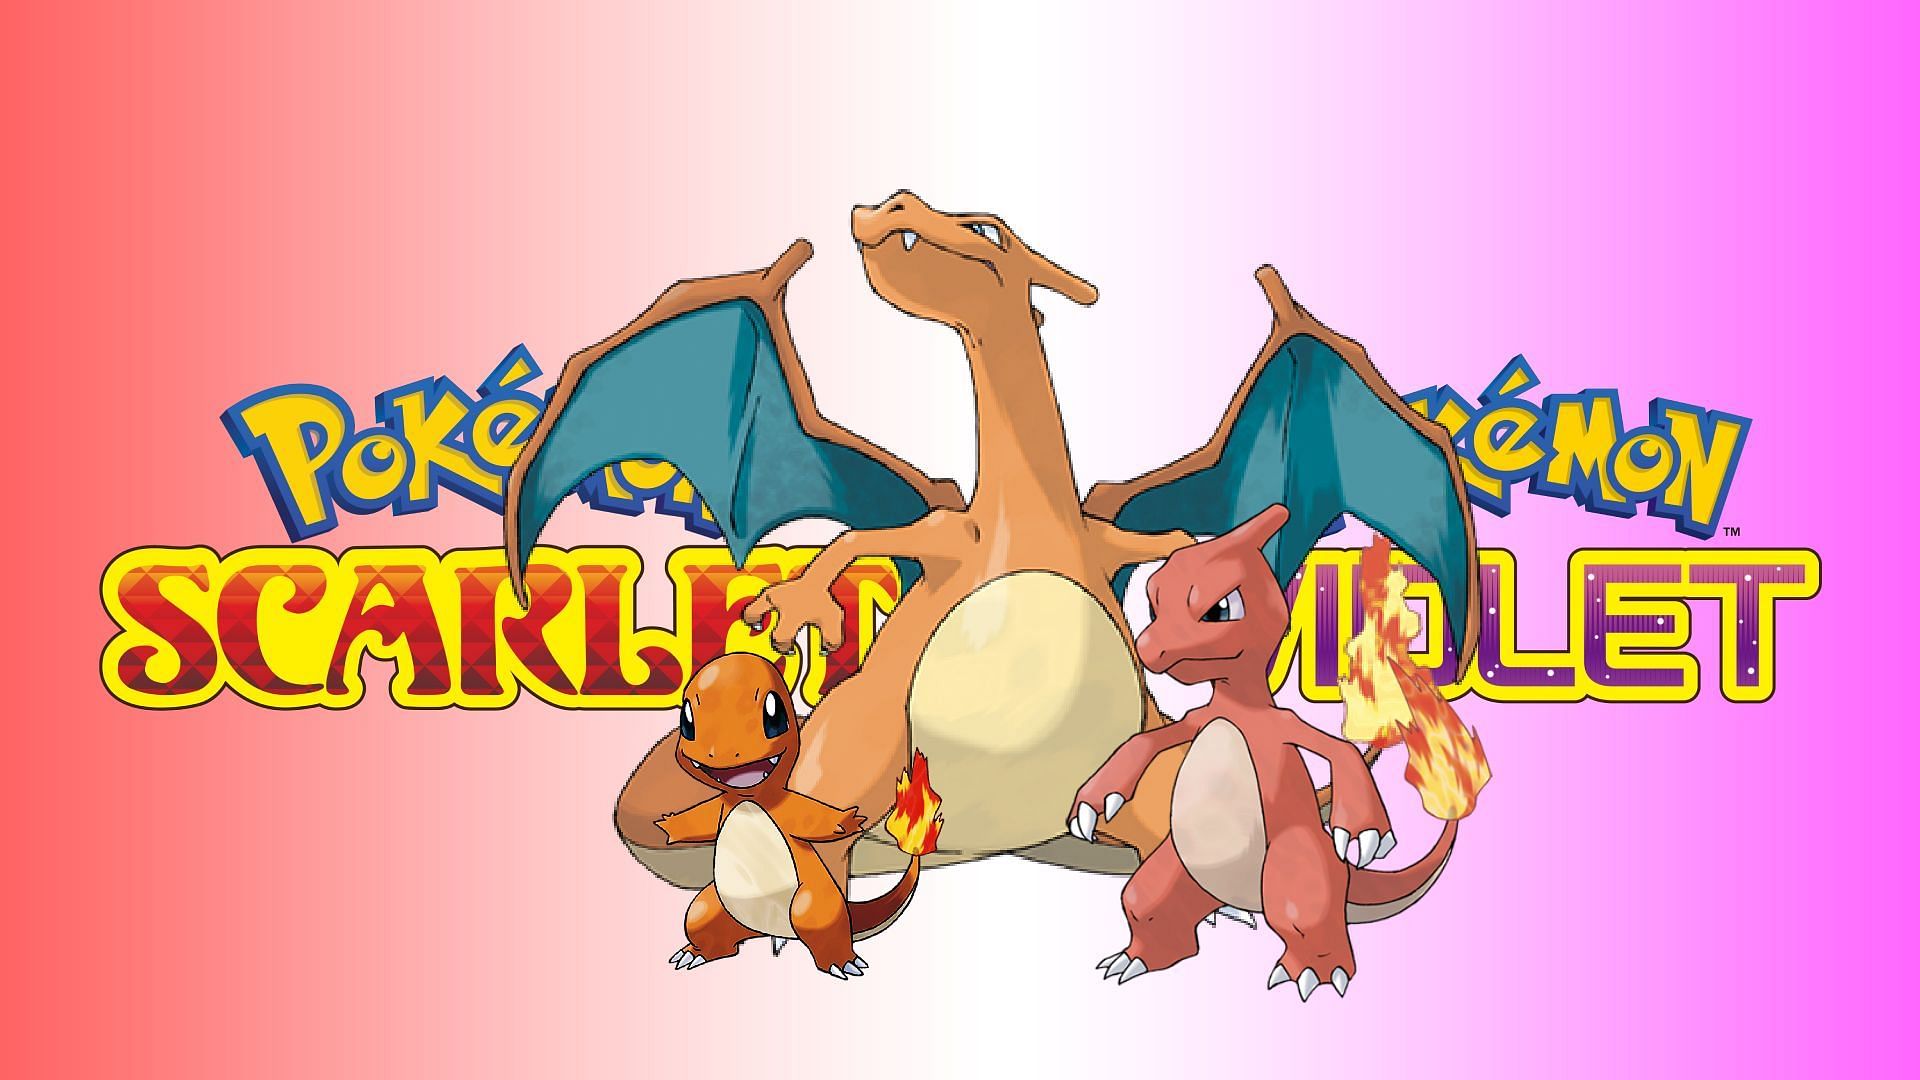 Charizard and its family (Image via Pokemon Scarlet and Violet)